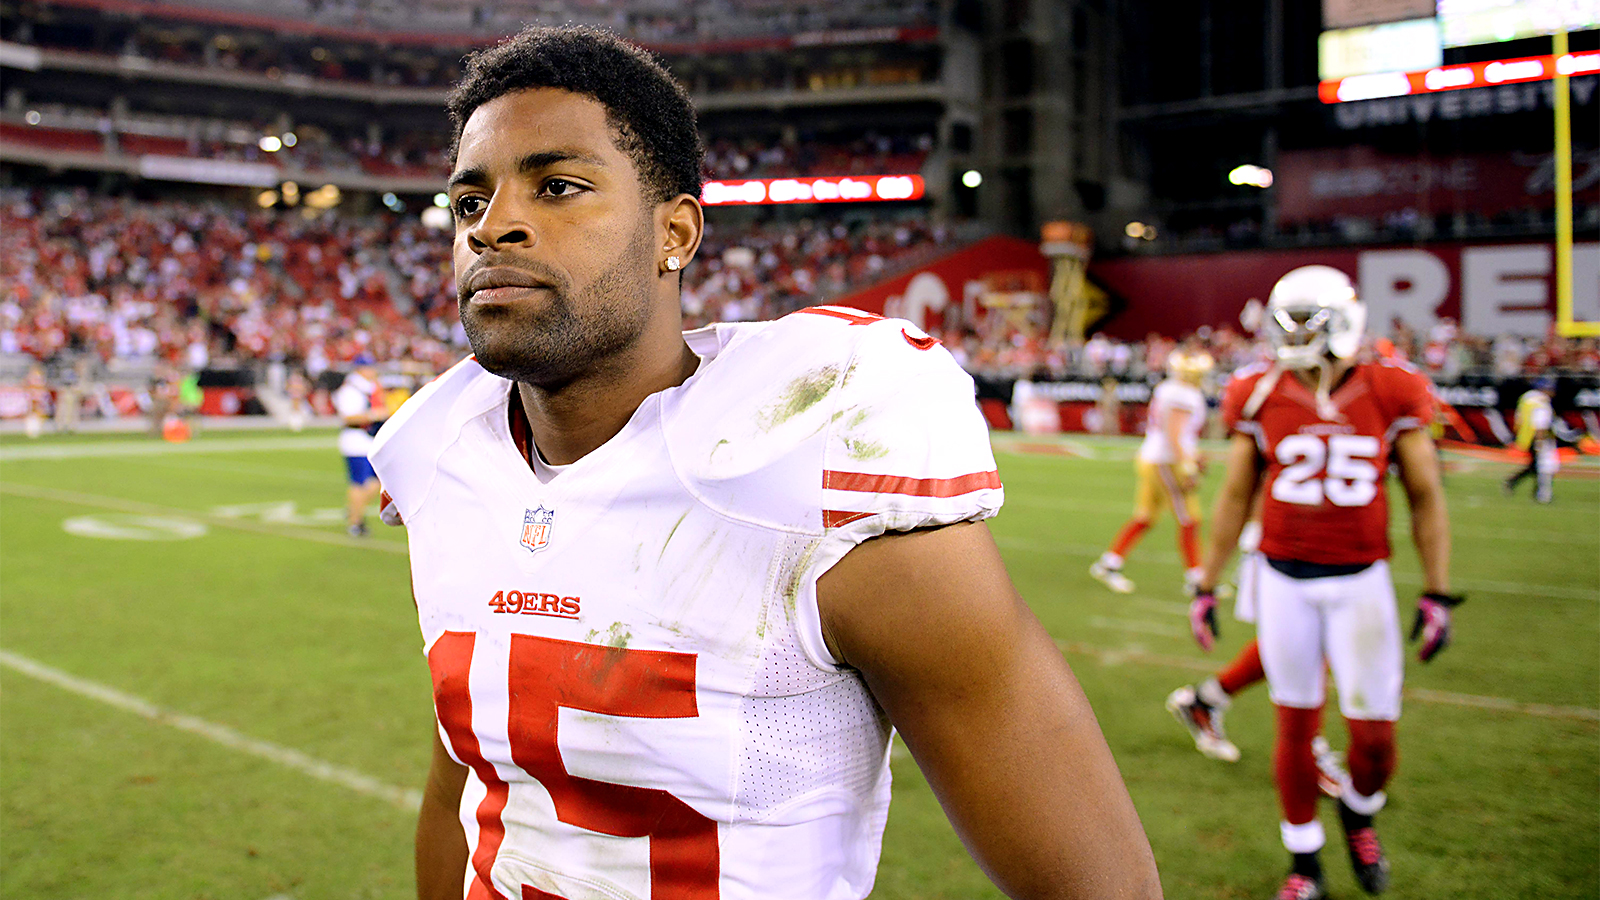 Michael Crabtree appears to throw shade at former QB Colin